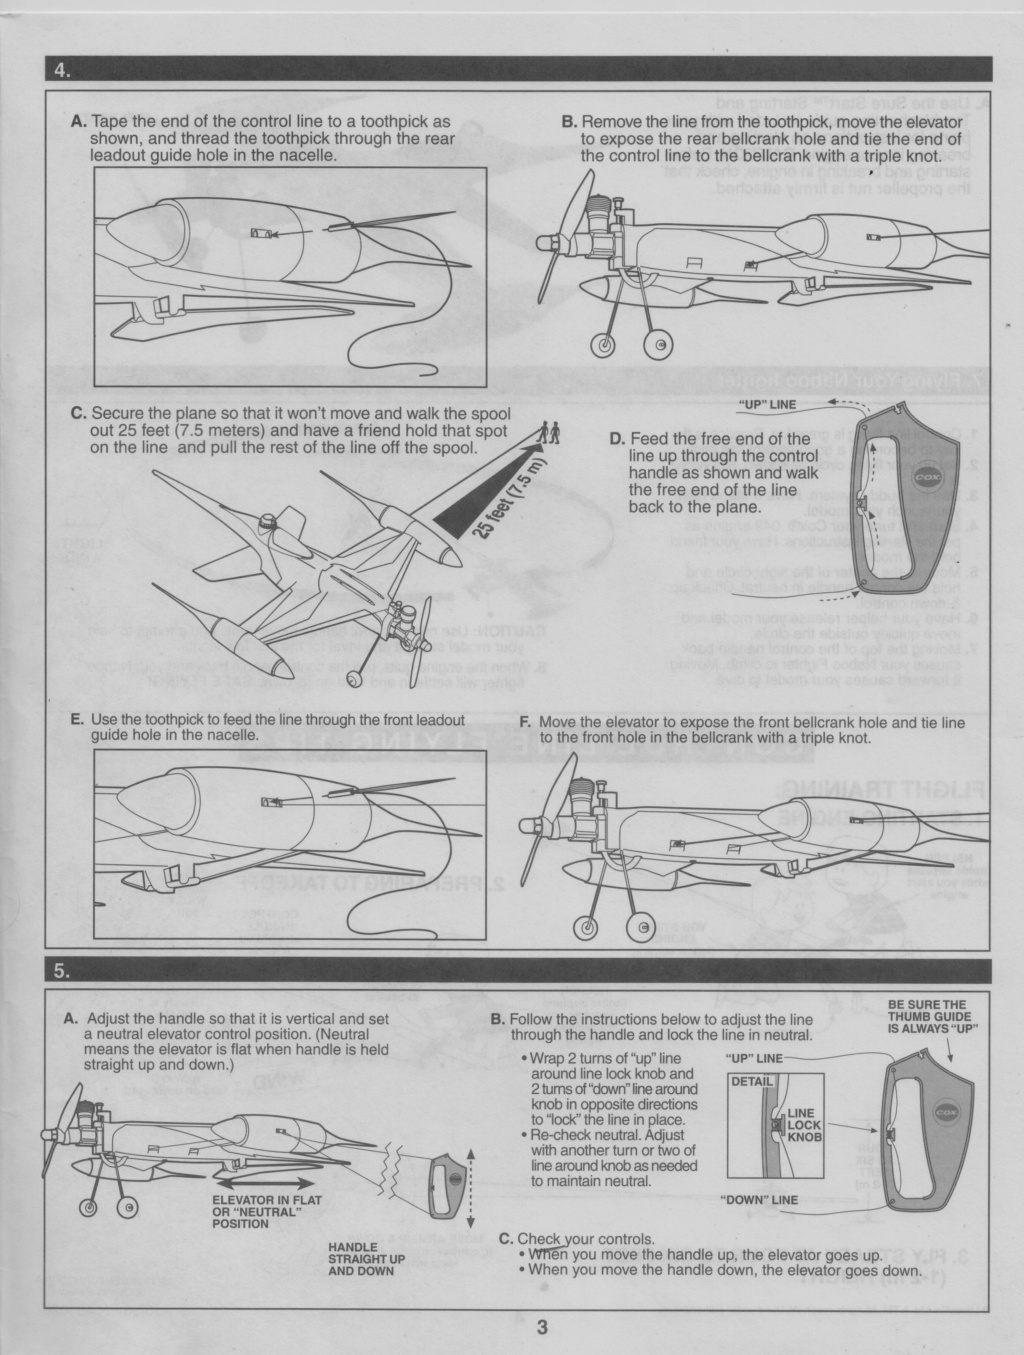 Naboo Fighter pictures and manual scans. Naboo_10